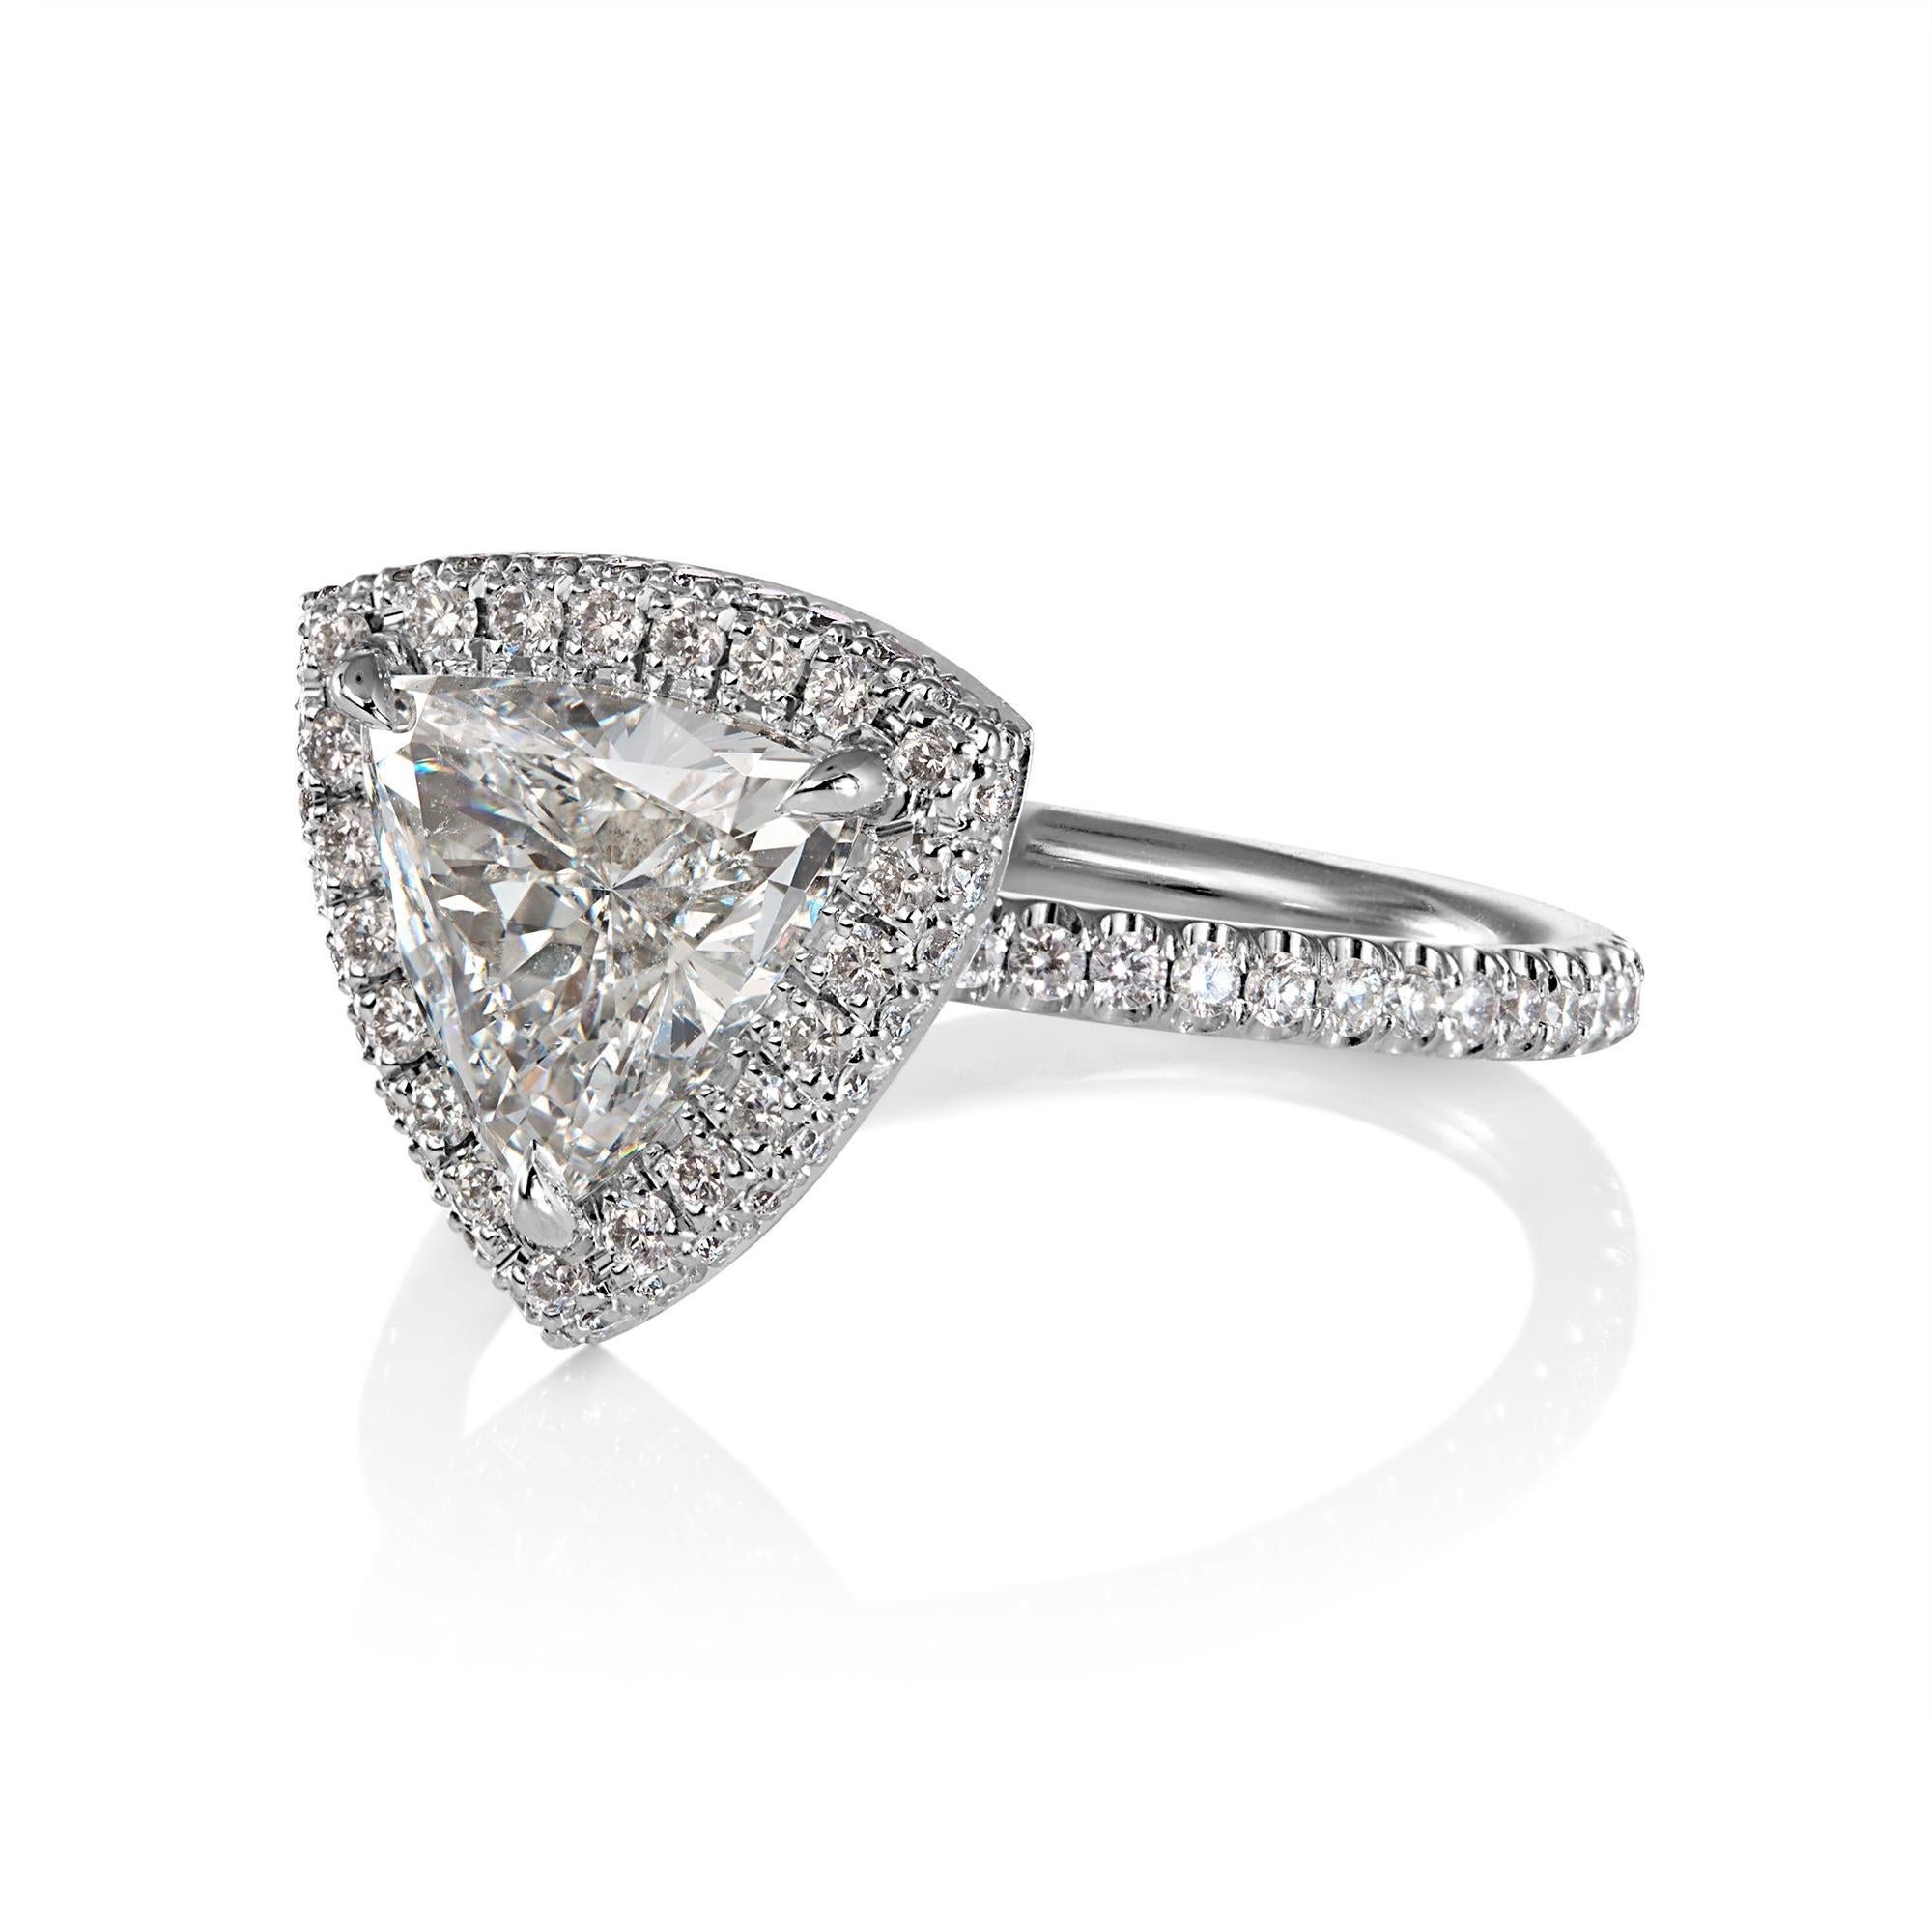 GIA 2.04ctw Trillion Diamond Double Edge Halo Pave Platinum Engagement Anniversary Ring.

The center is Trillion, Triangular Brilliant 1.48CT Center in J color, SI2 clarity (SUPER Brilliant, near colorless white and Eye Clear), GIA Certified. The